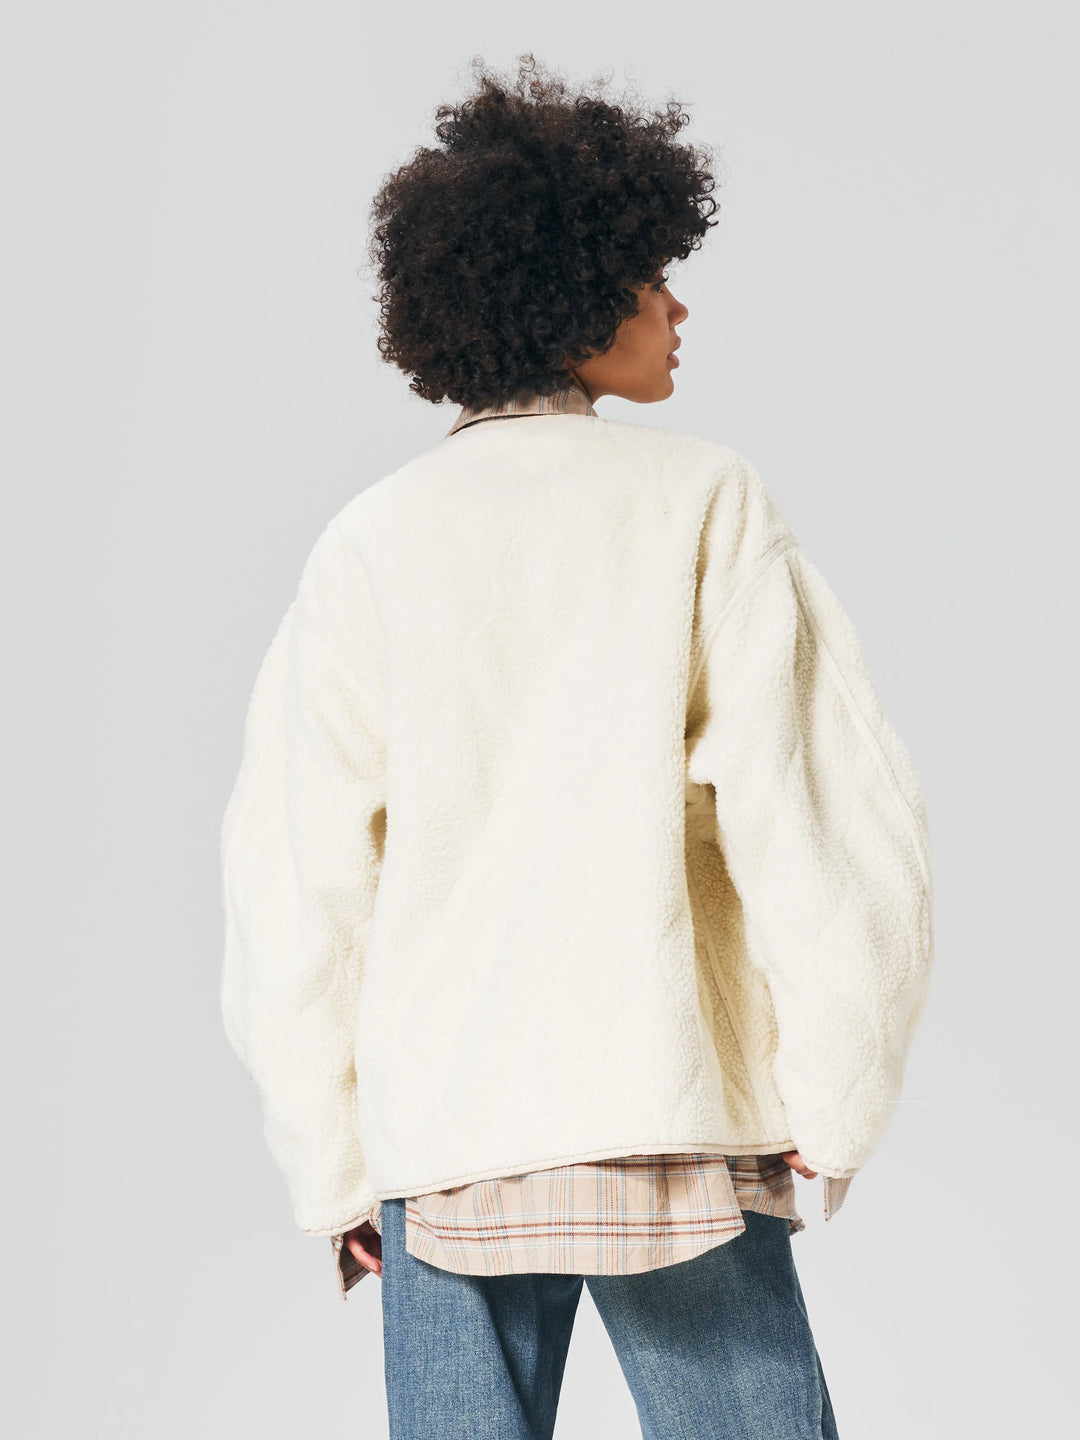 An image of a   S0001 Sherpa Reversible Jacket by  Mirra Masa